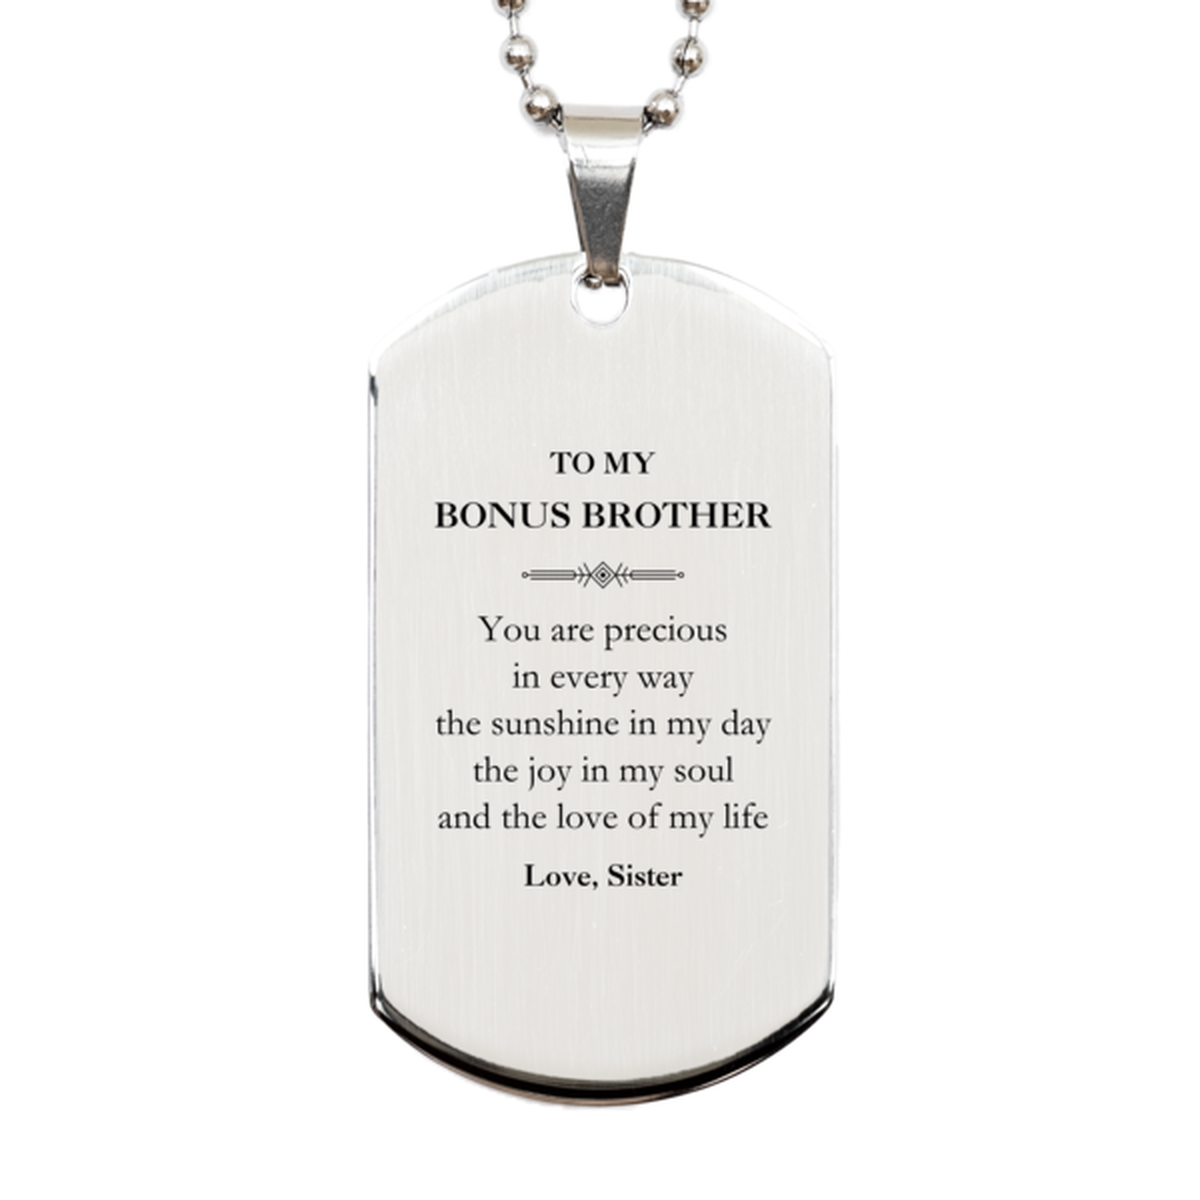 Graduation Gifts for Bonus Brother Silver Dog Tag Present from Sister, Christmas Bonus Brother Birthday Gifts Bonus Brother You are precious in every way the sunshine in my day. Love, Sister